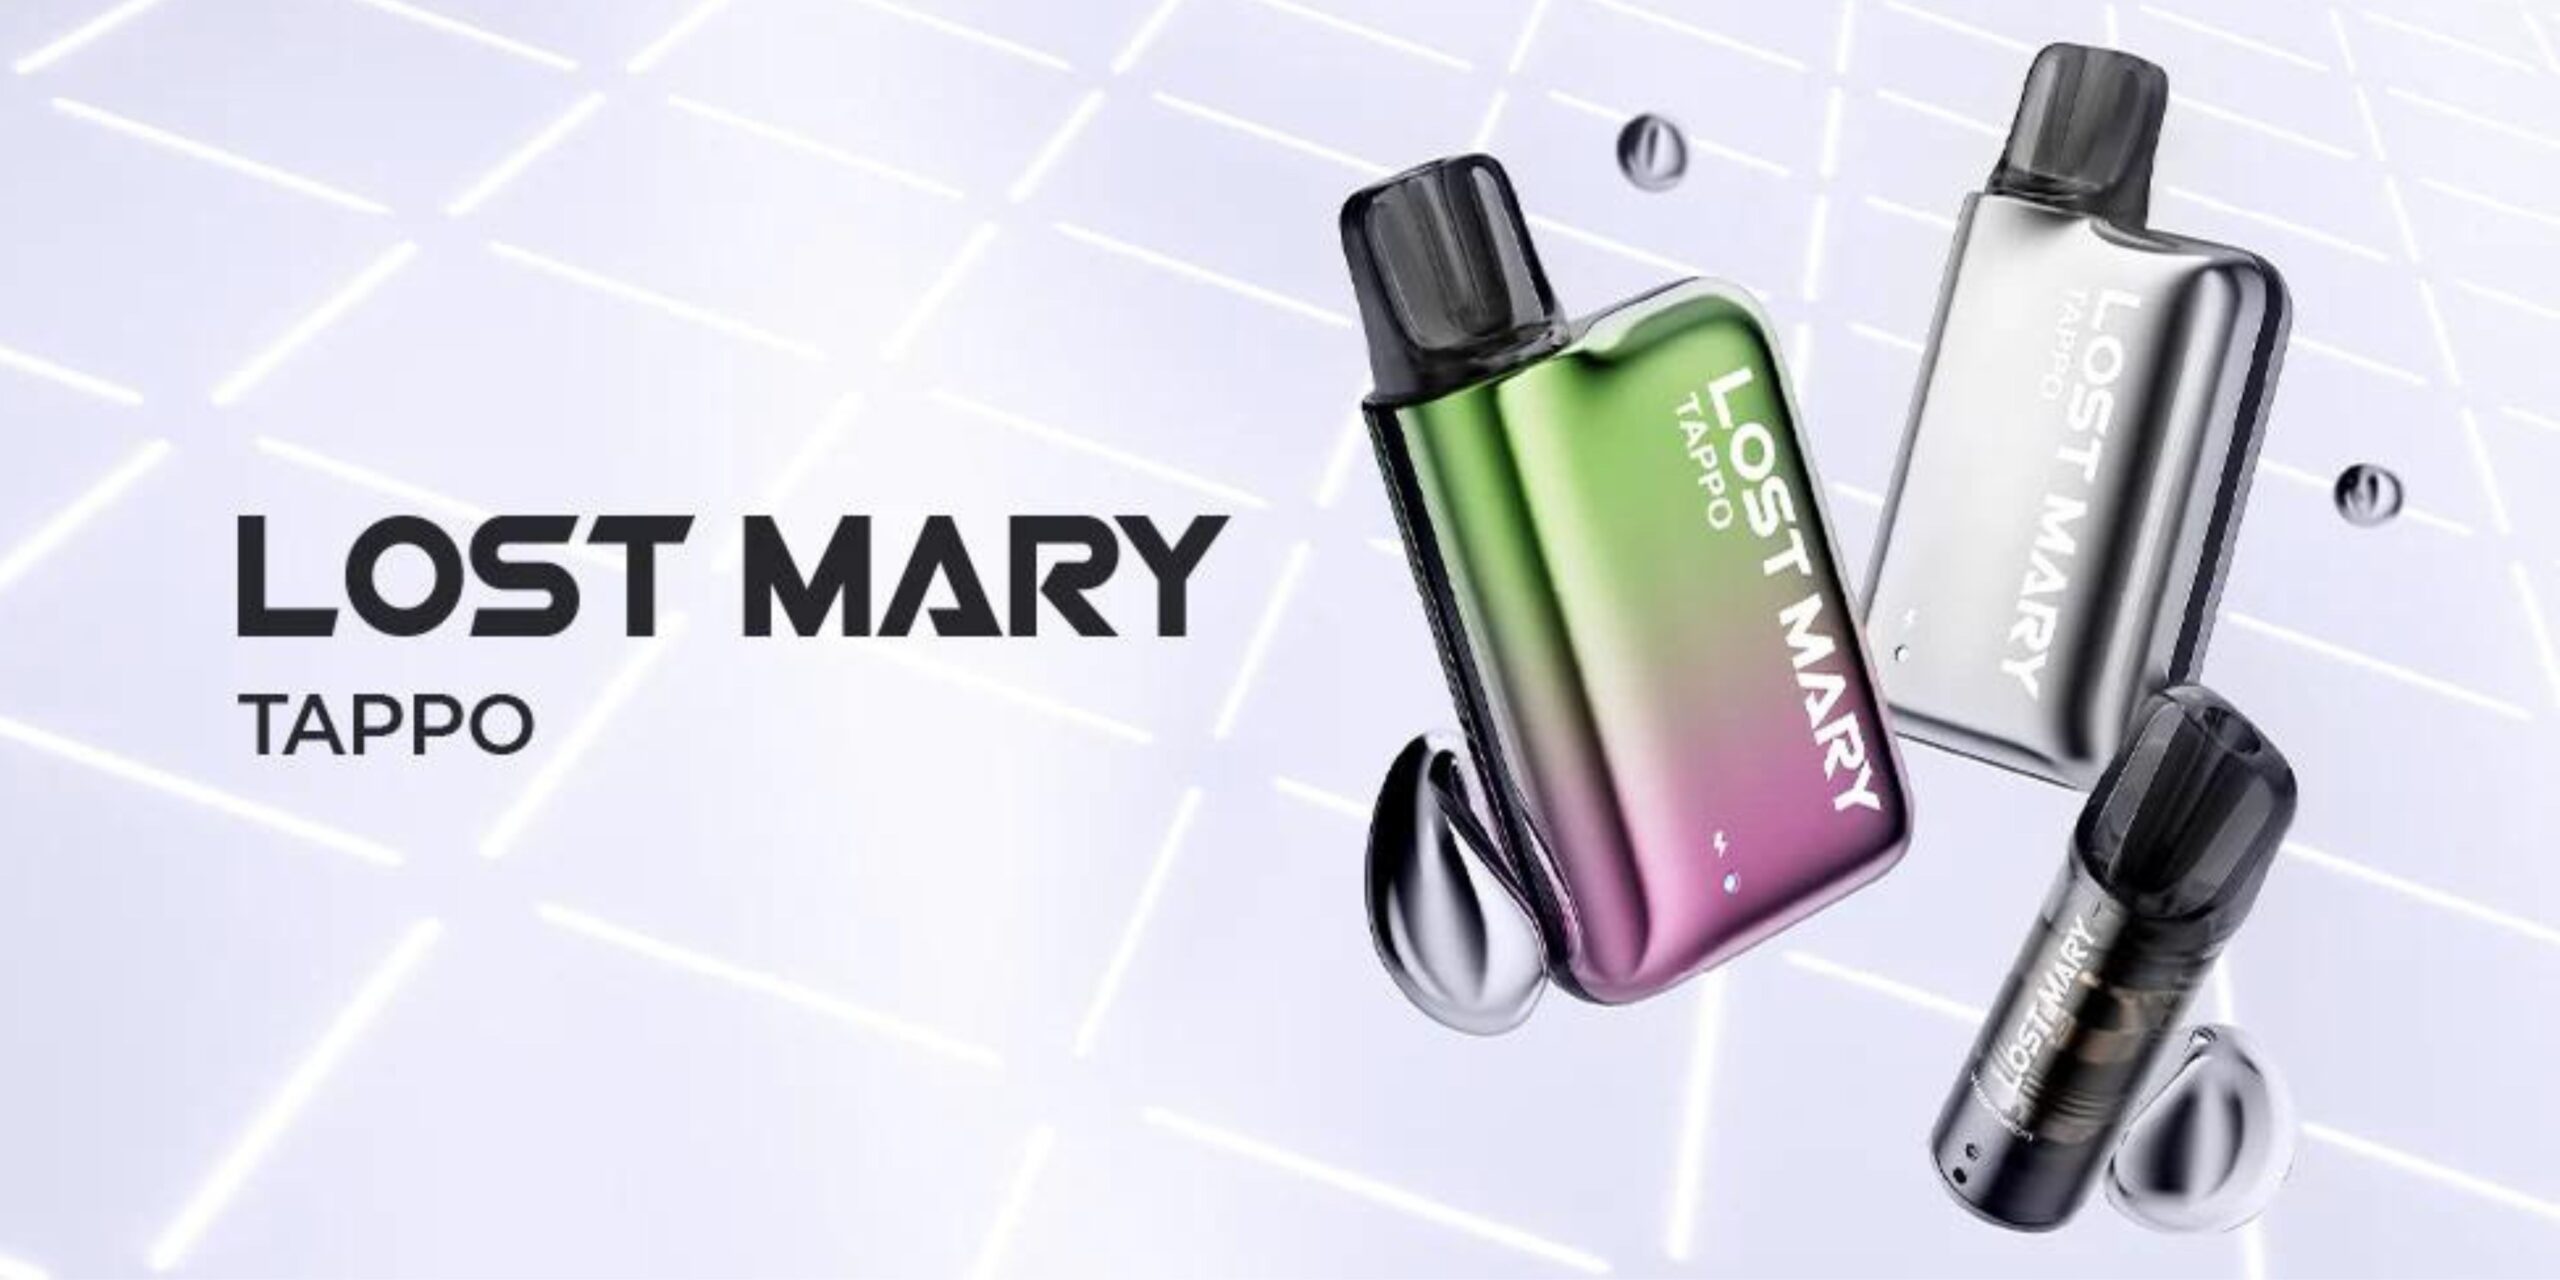 LOST MARY TAPPO – Blue Razz Lemonade (Replacement Prefilled Pods) VAPING - XMANIA Ireland 15